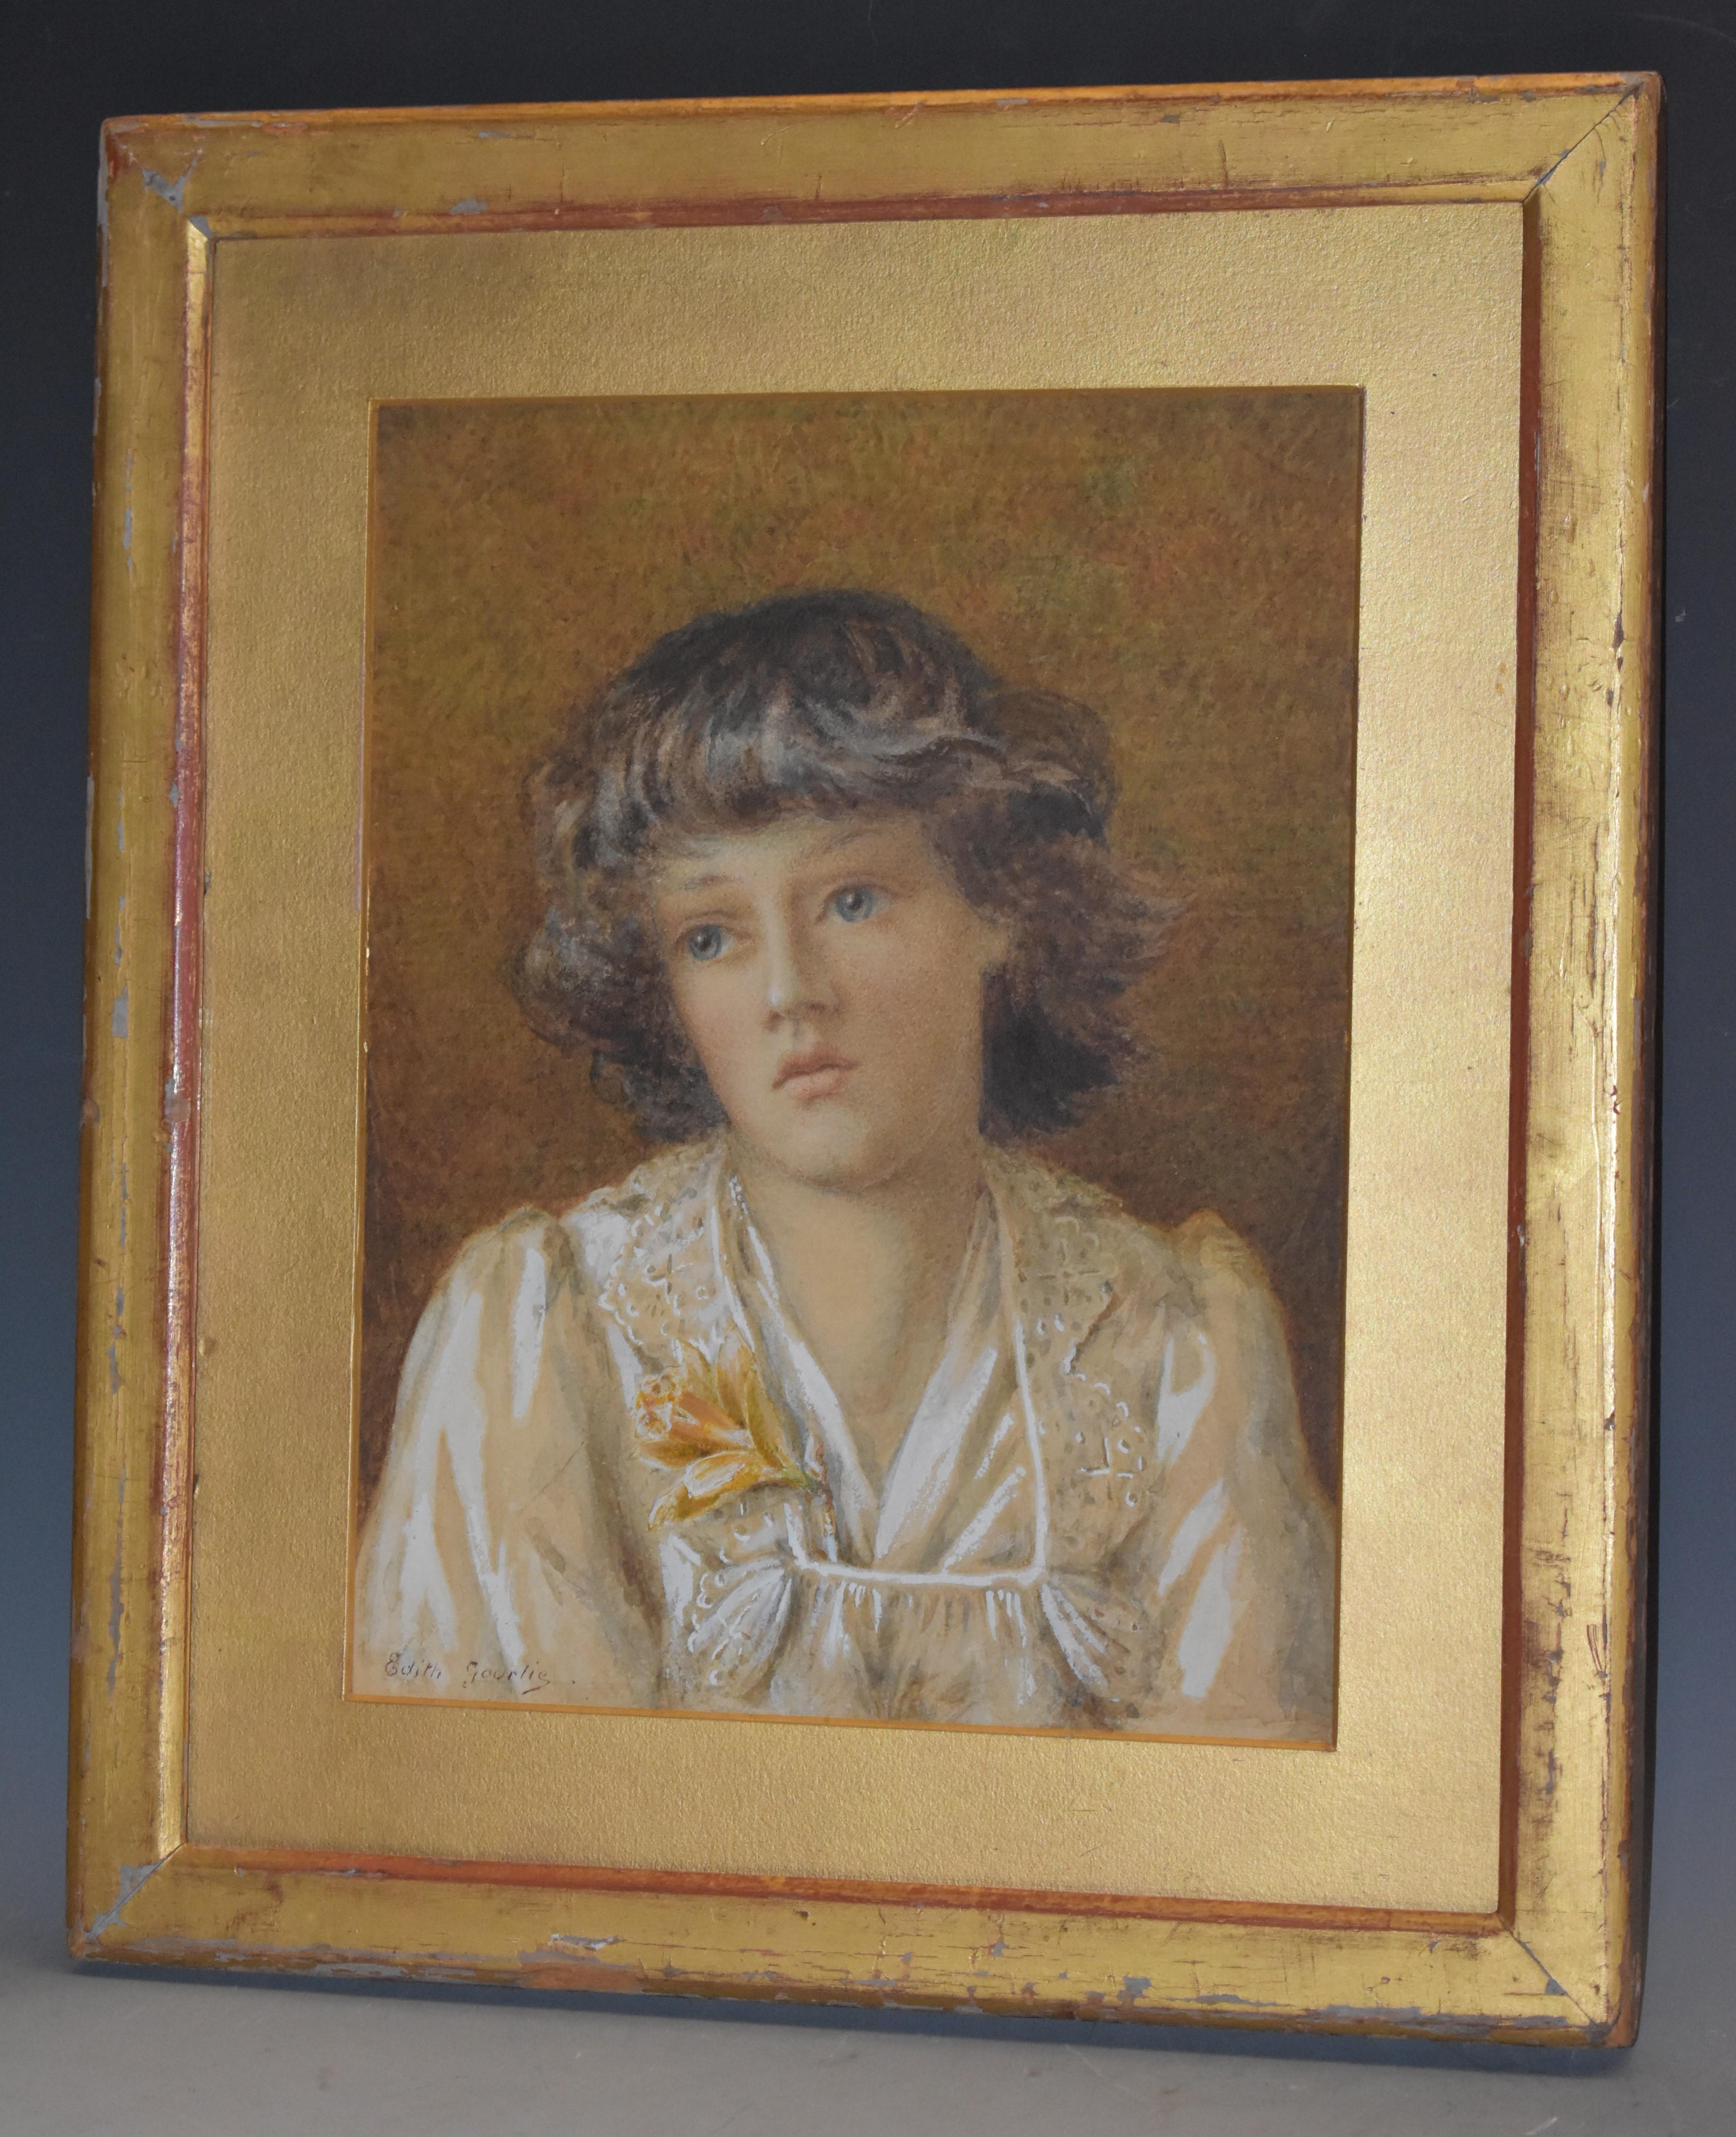 Edith Gourlie 'Daffodil', portrait of a young girl signed, label to verso, watercolour, 25.5cm x 19.